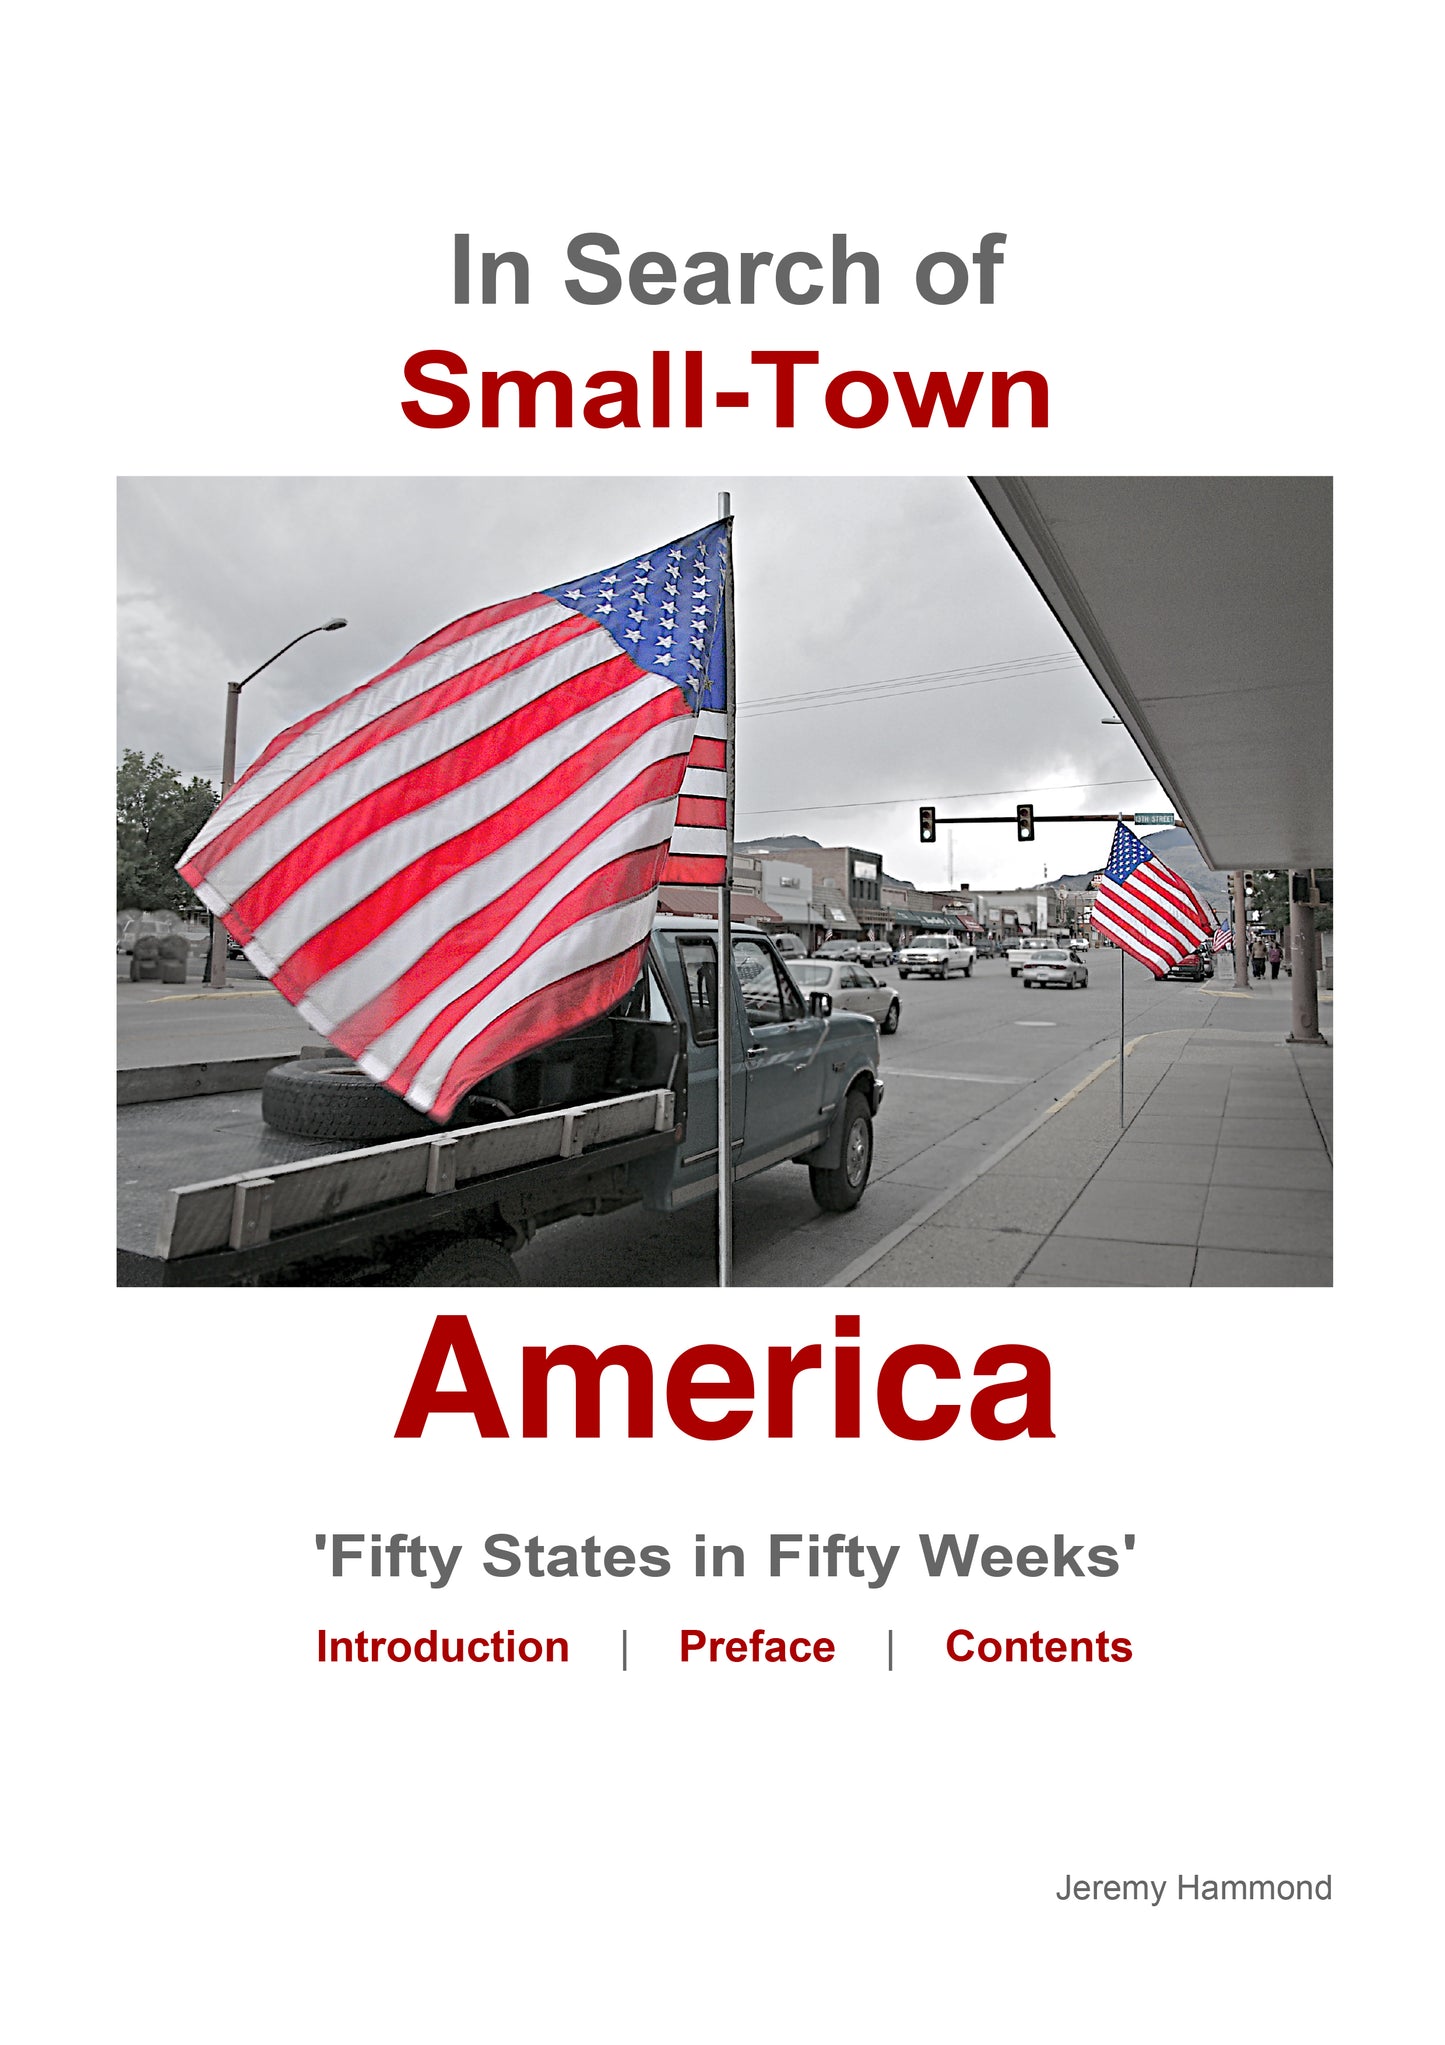 In Search of Small-Town America: Introduction